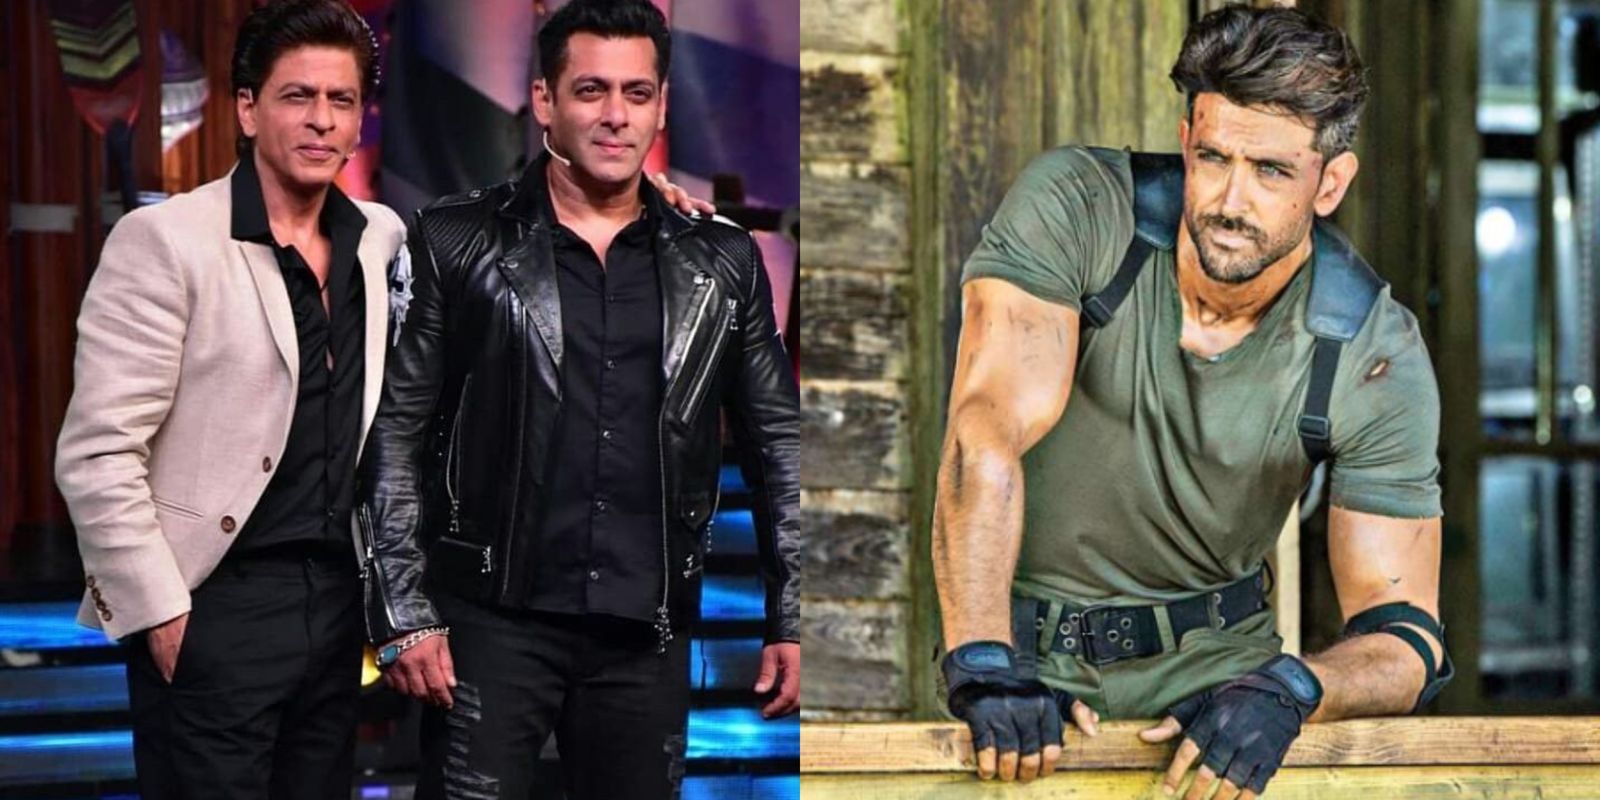 Shah Rukh Khan And Salman Khan To Have Cameos In Hrithik Roshan's War Sequel As Tiger And Pathan?